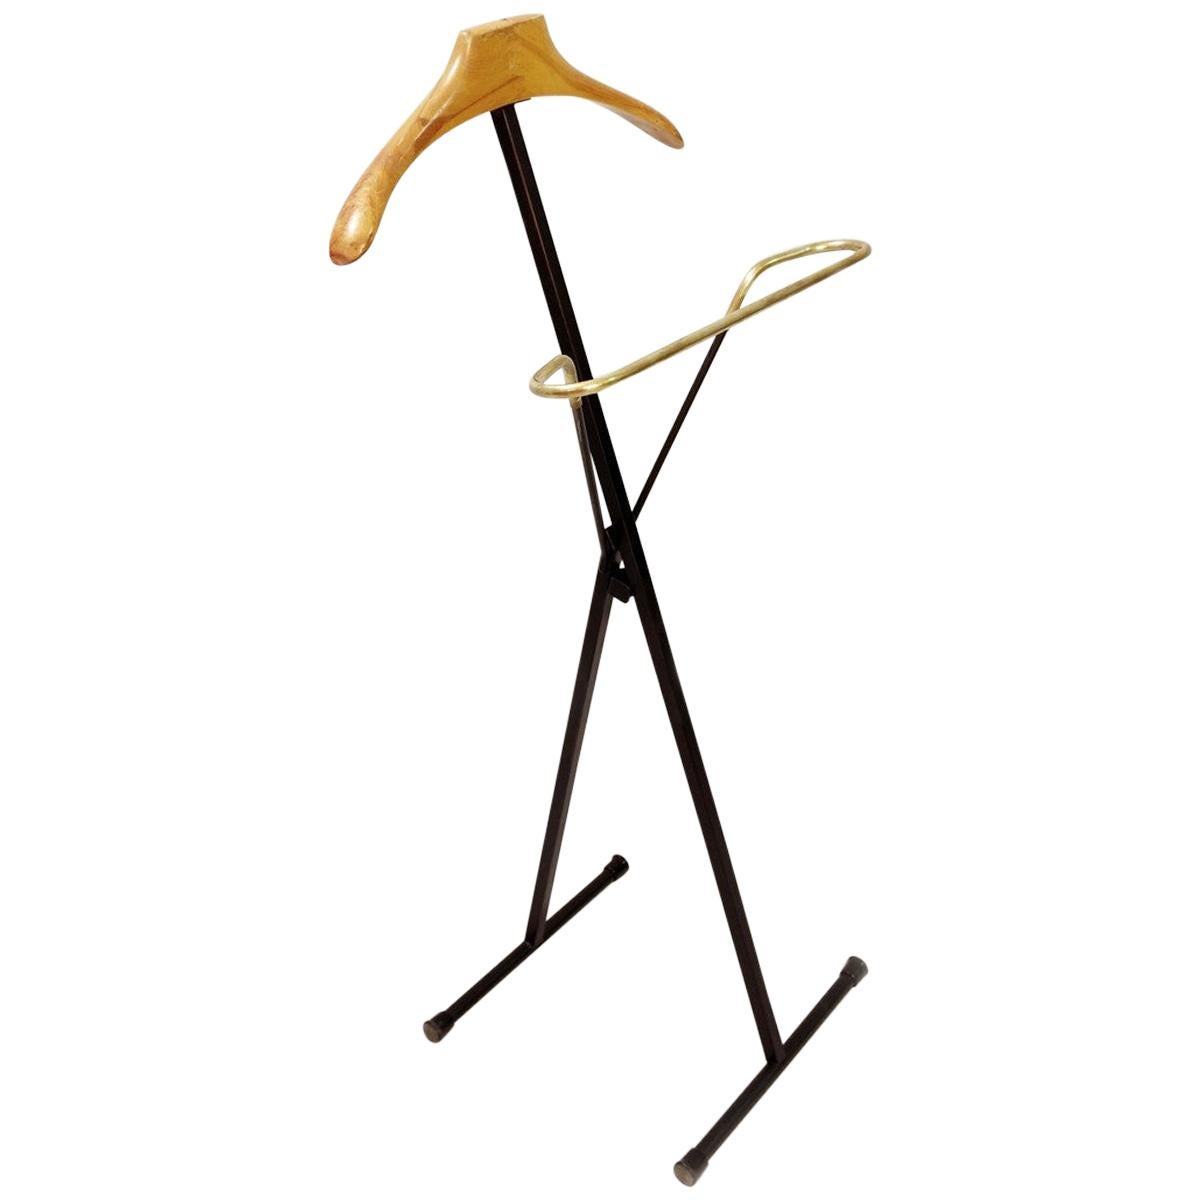 Italian Black Metal, Wood and Brass Folding Valet Stand, 1950s For Sale